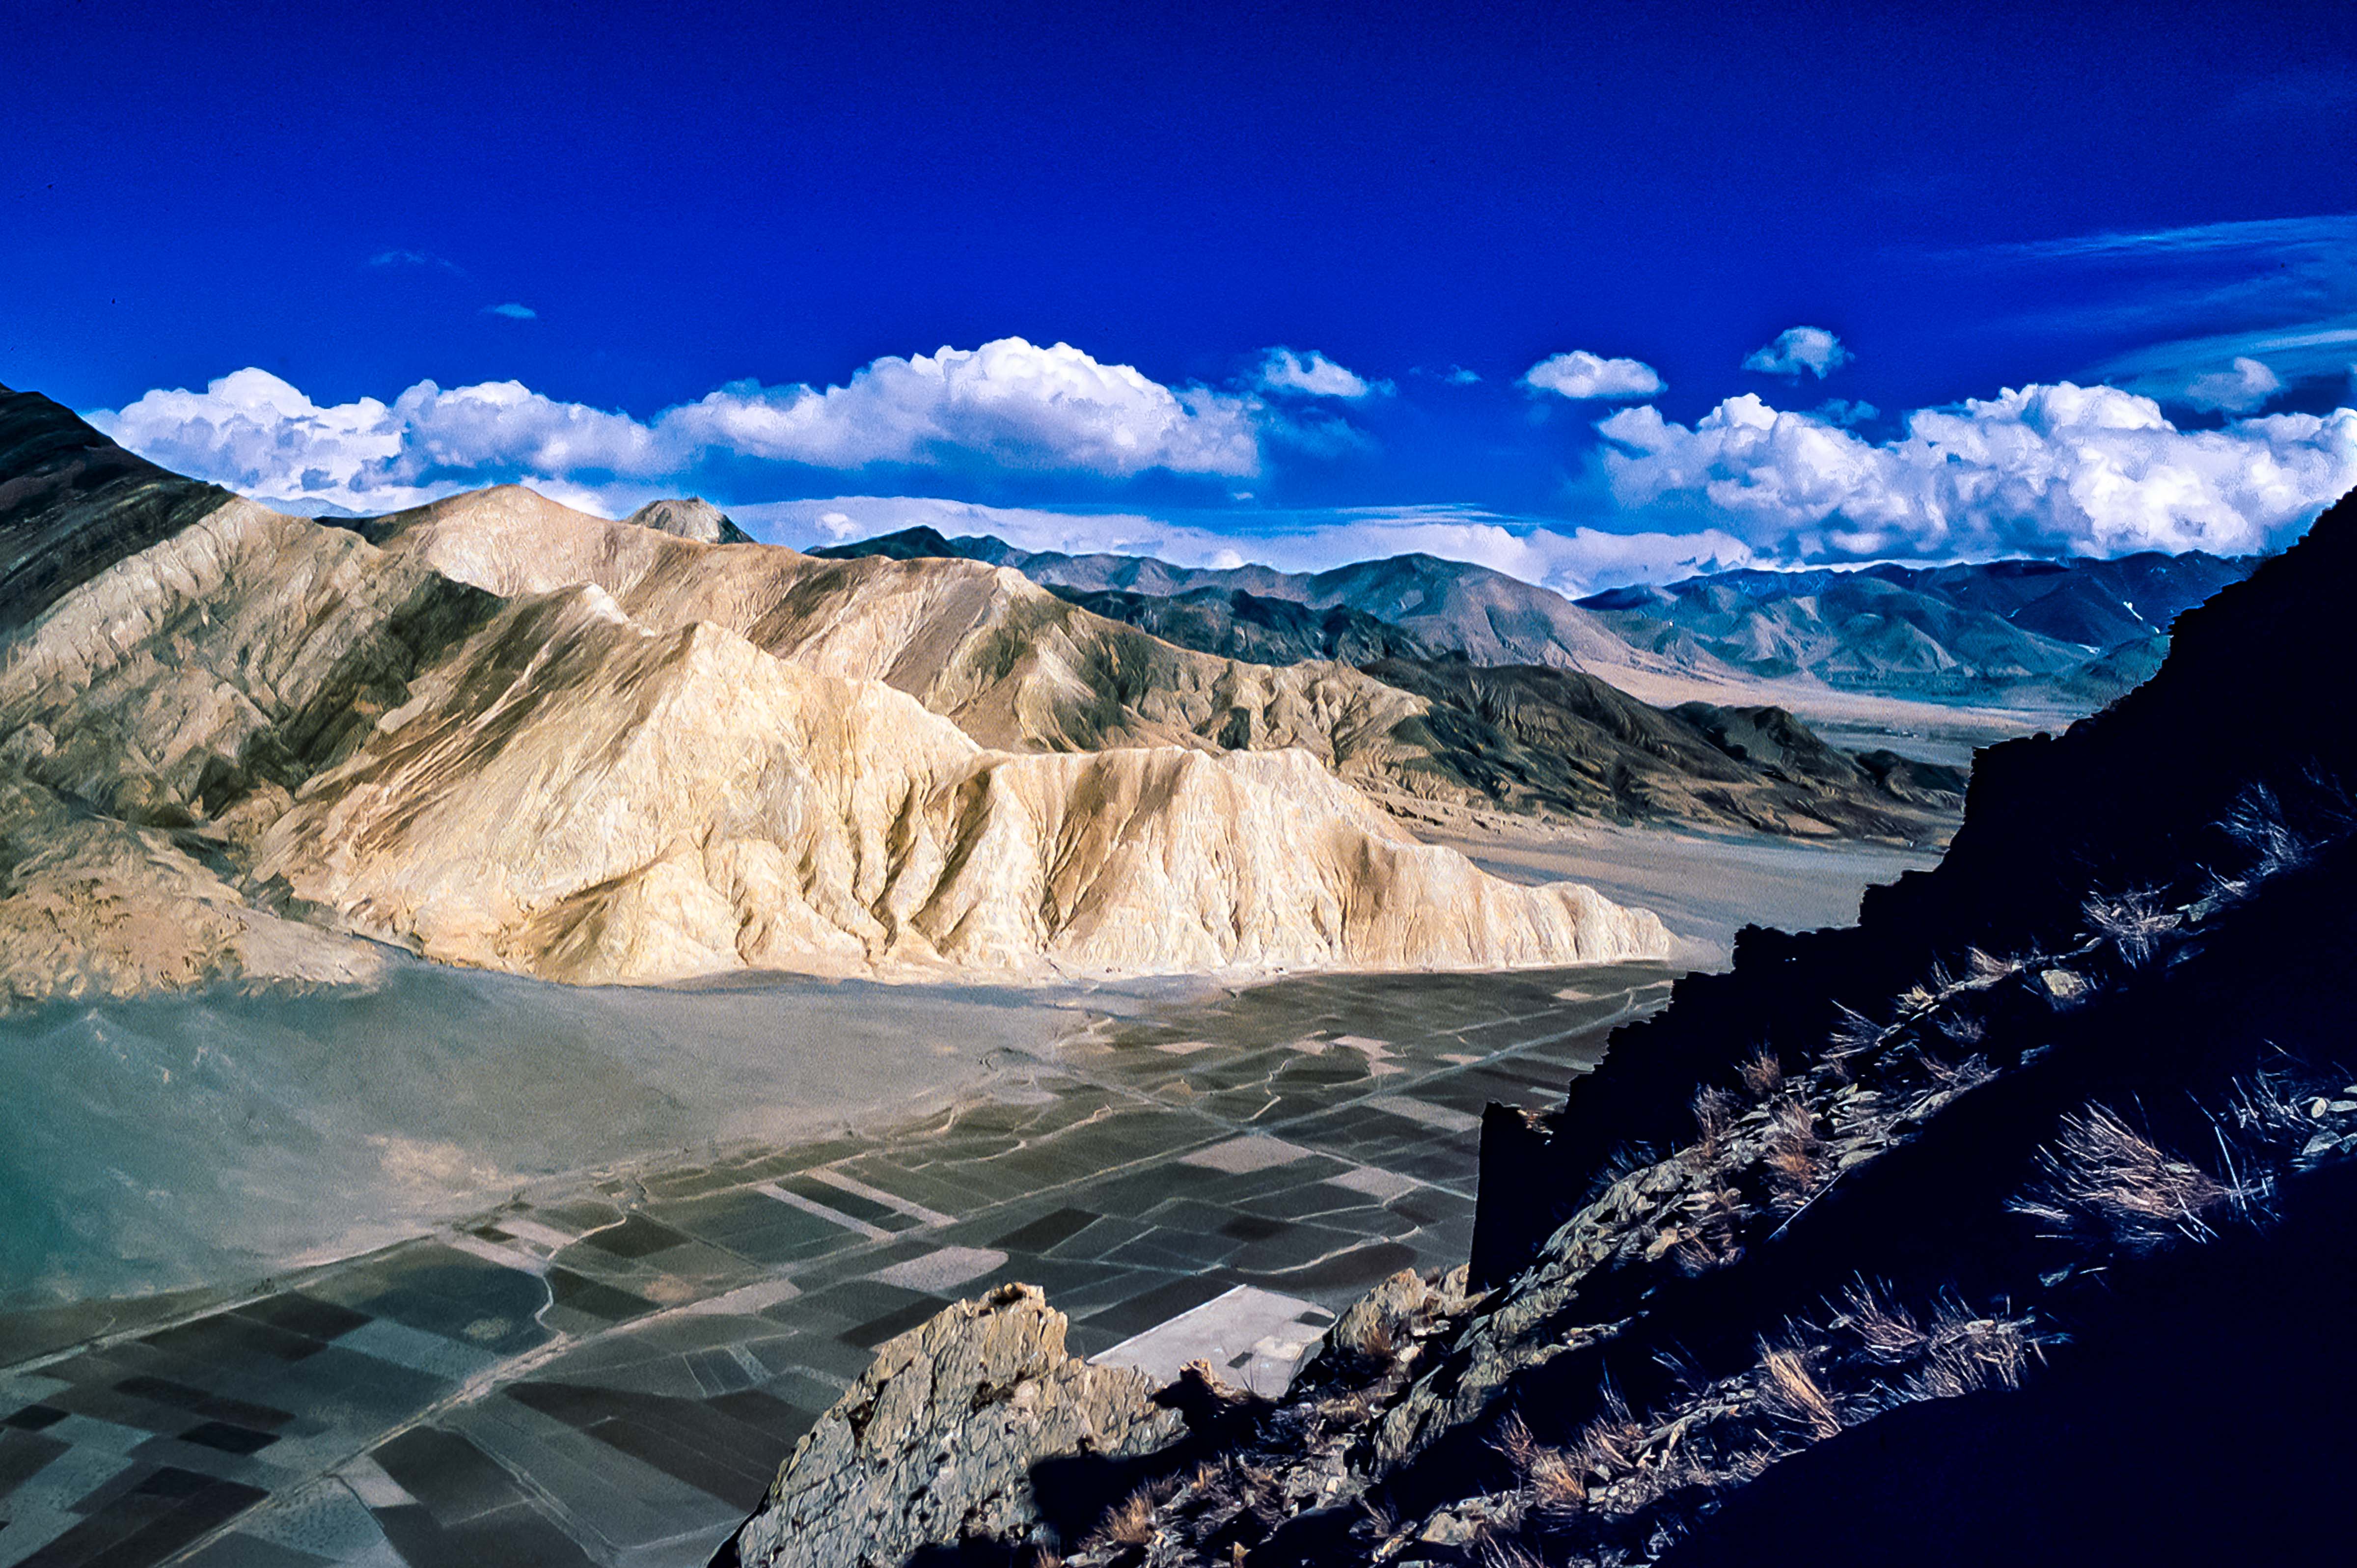 Tibet, Xegar, View Of Valley From Top Of Hill, 1995